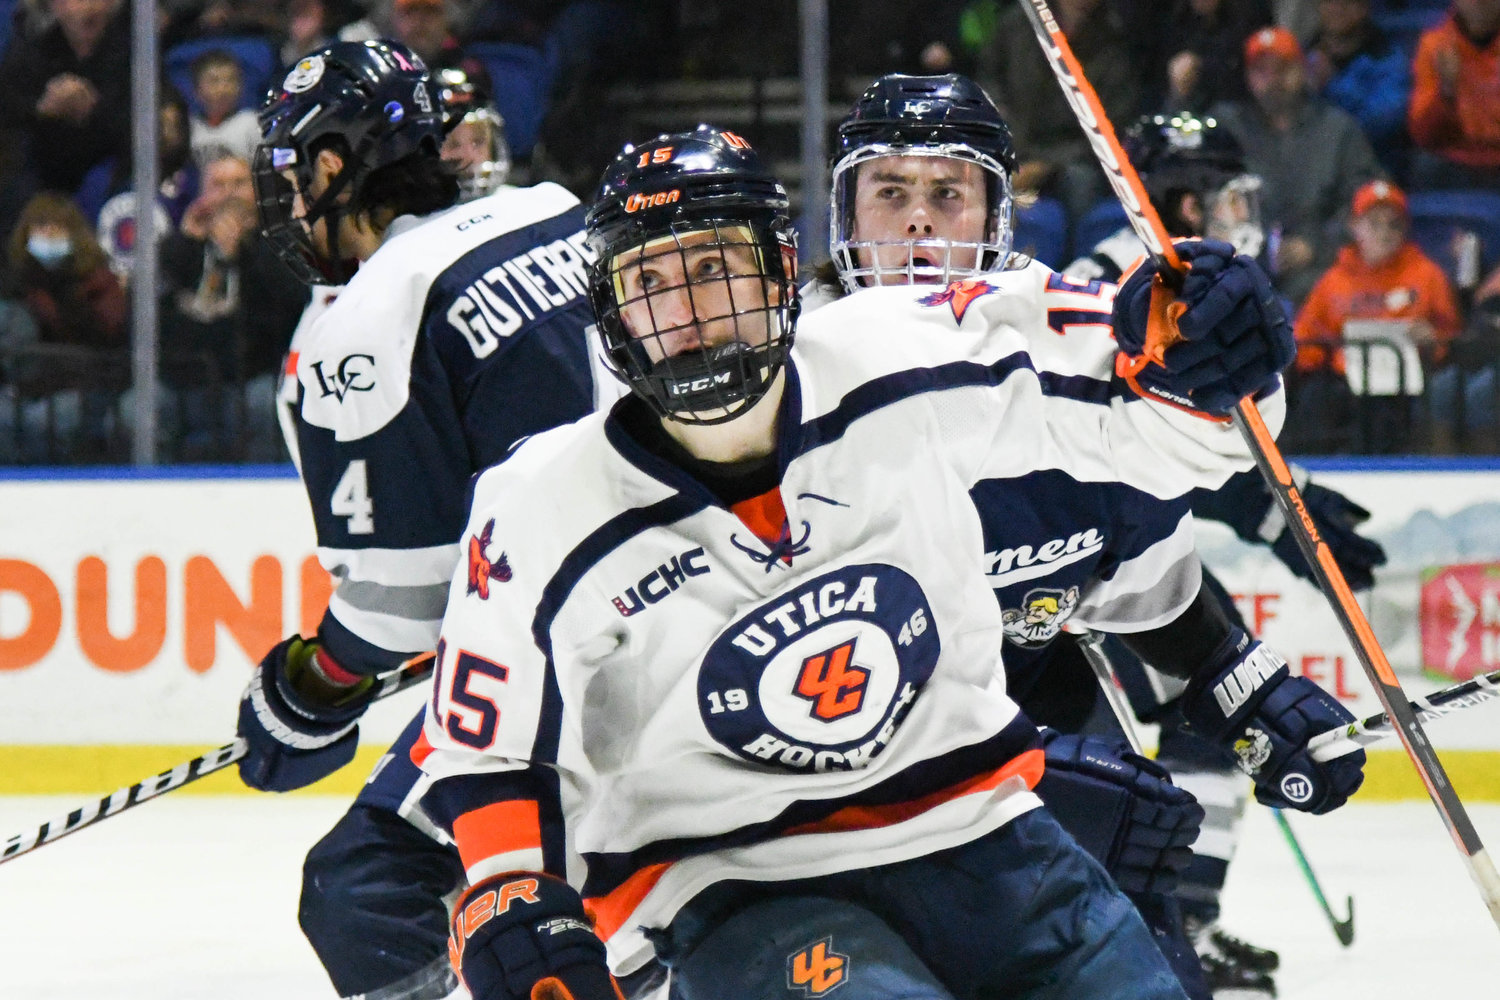 BIG SEASON — Eric Holland (15) and the Utica University men's hockey team finished with a 25-3-1 record during the 2021-22 season.